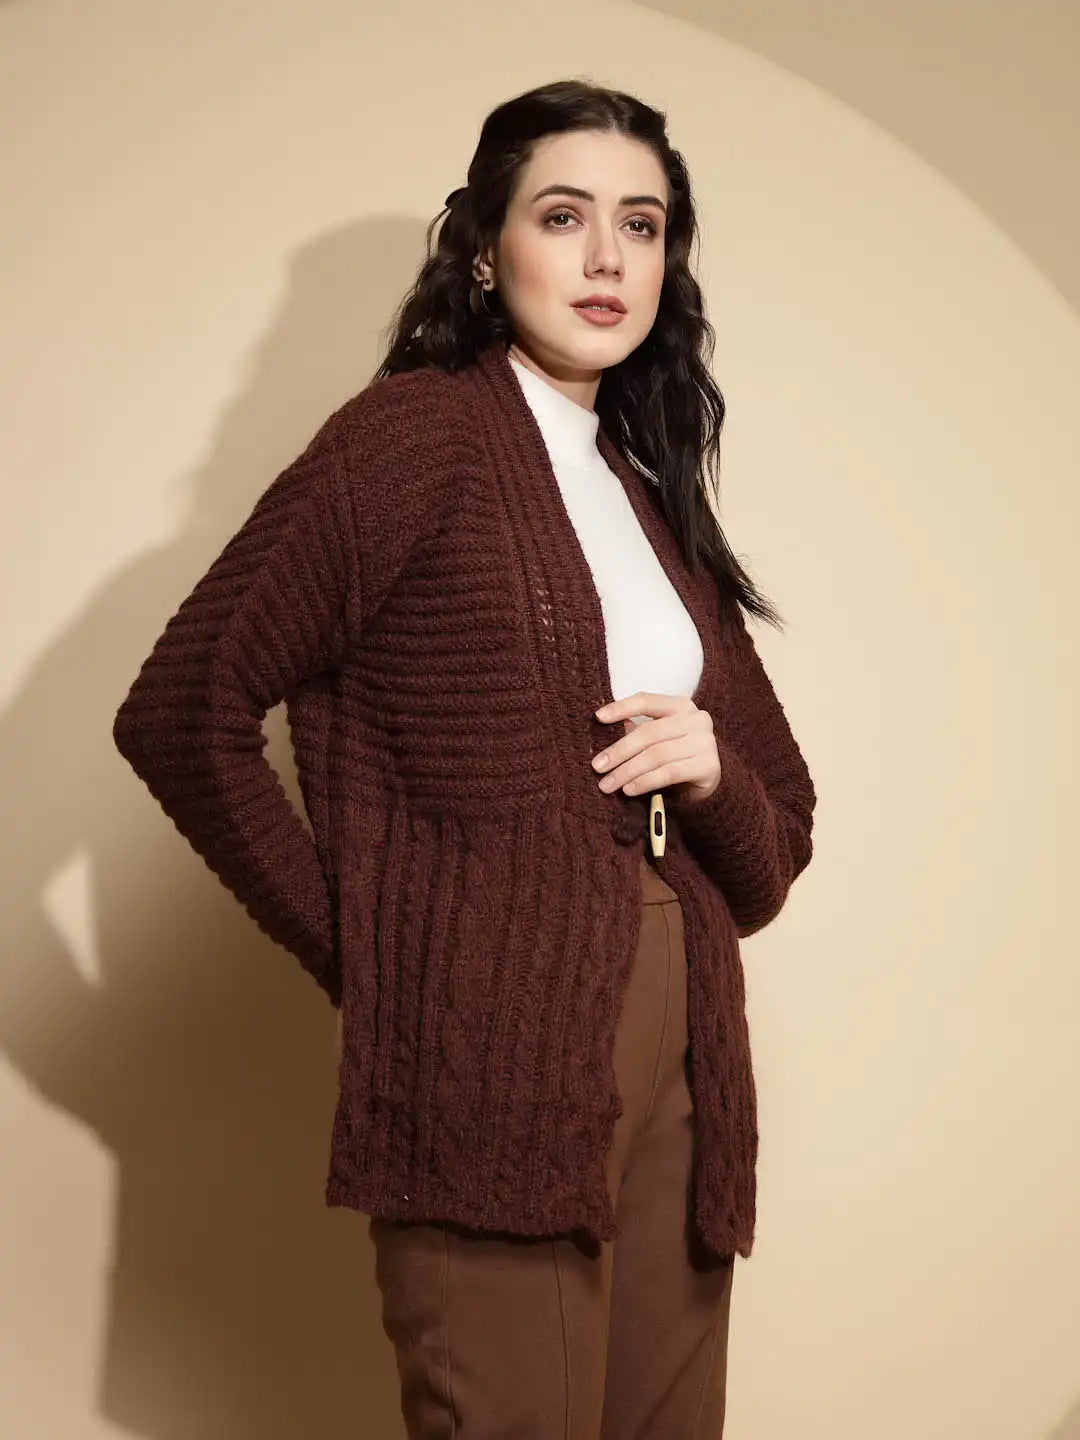 Solid Dark Brown Full Sleeve Open Neck Knitted Cardigan